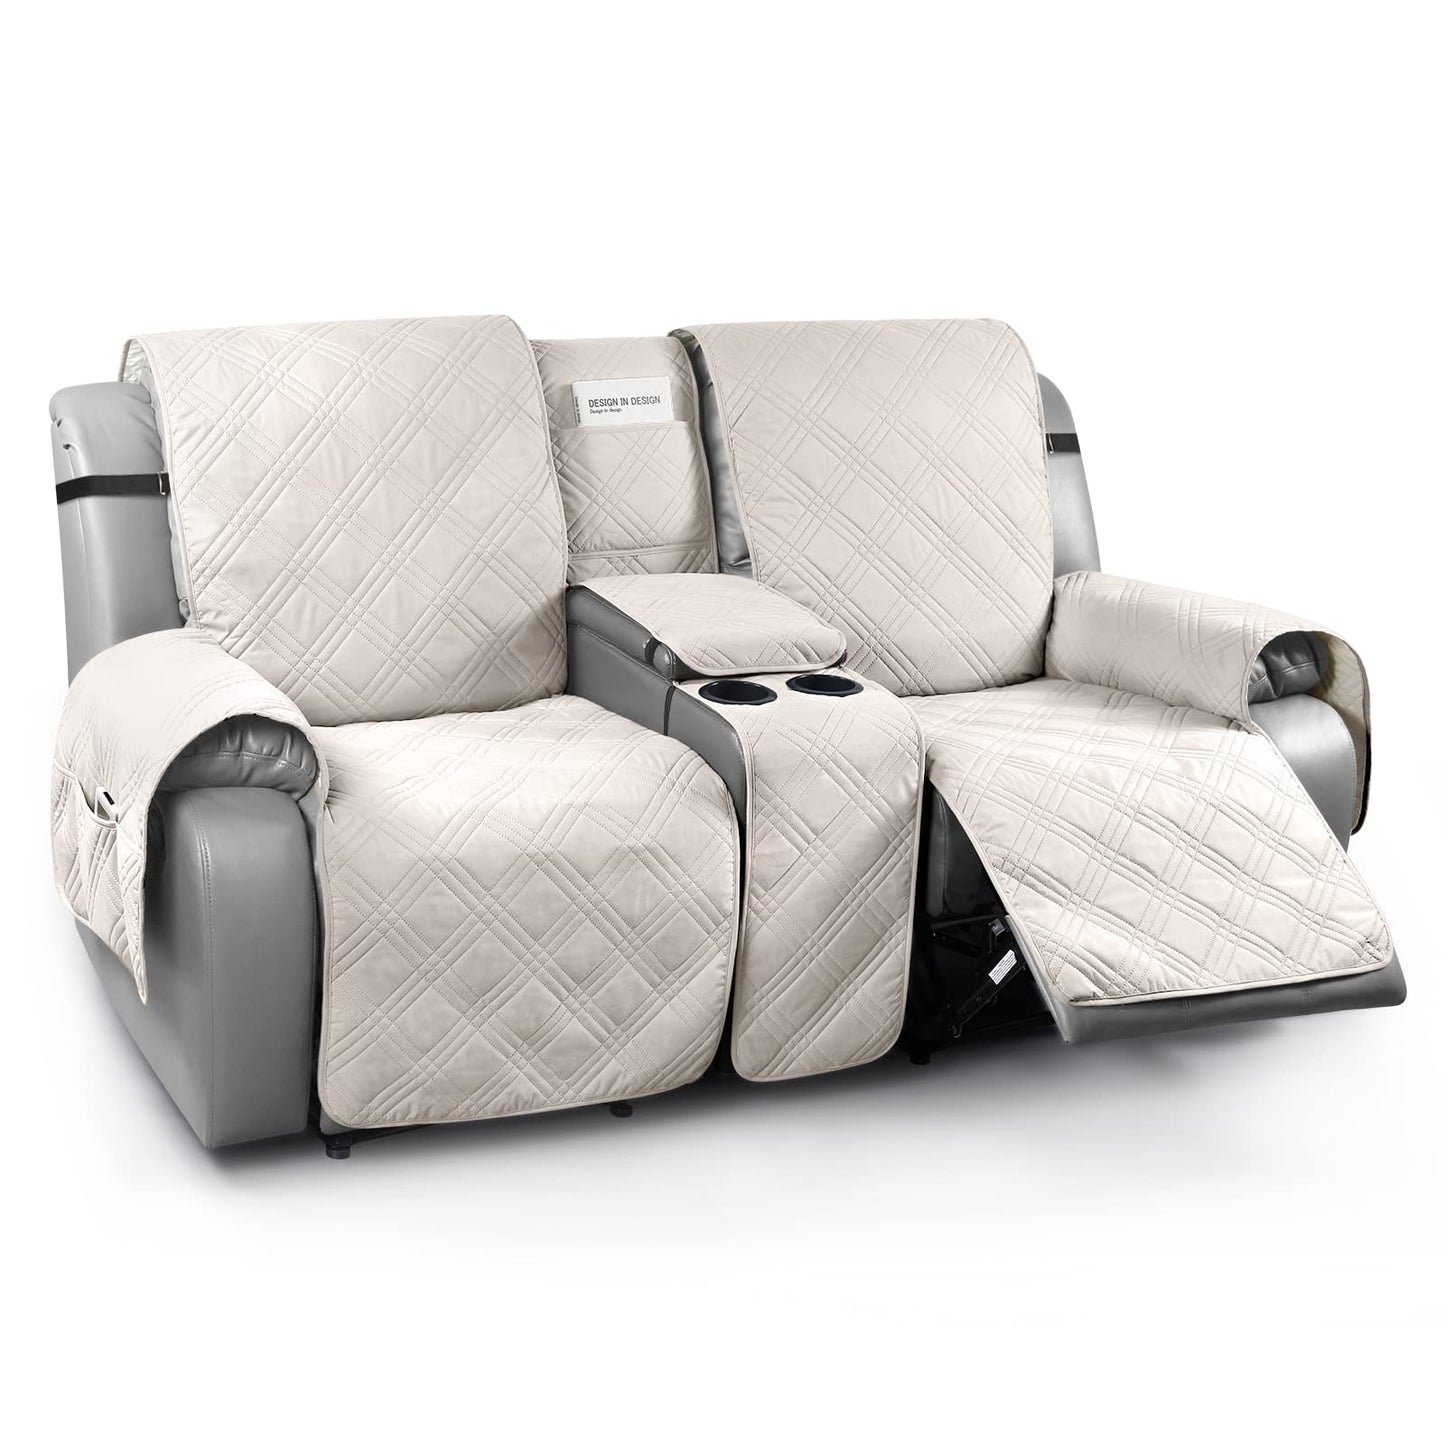 Loveseat Recliner Cover with Center Console (2 Seater) - TAOCOCO